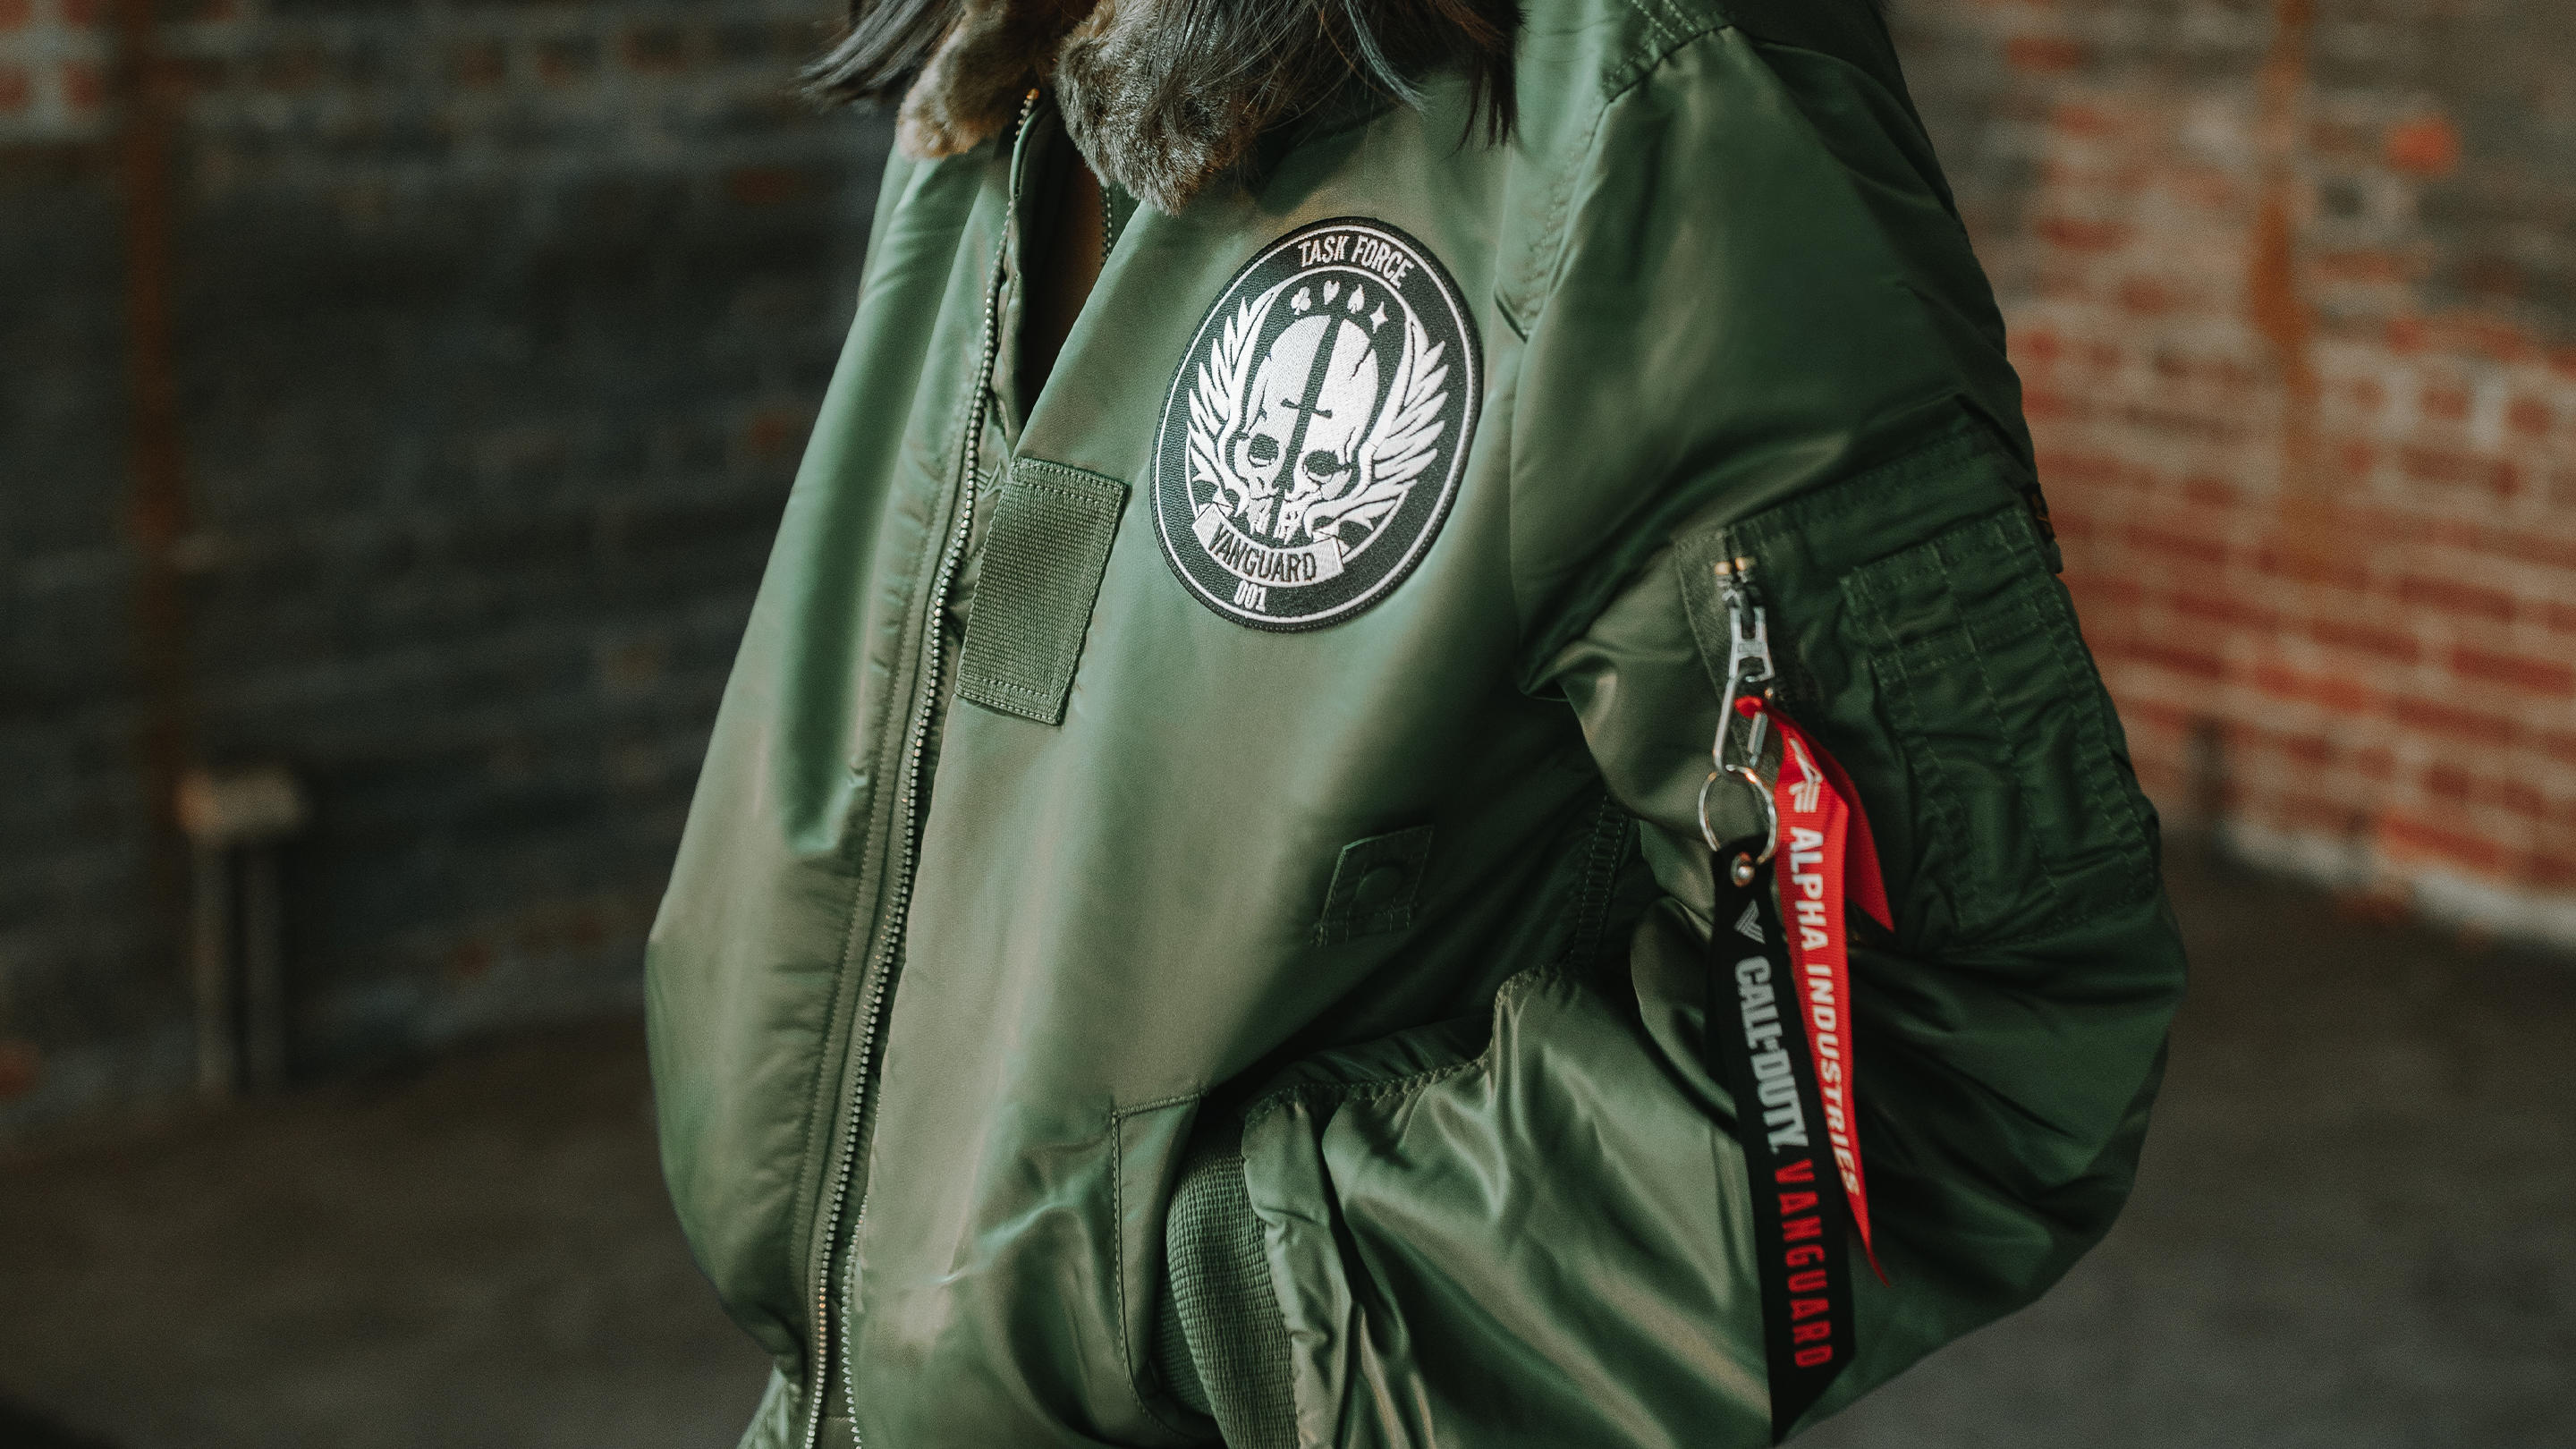 Call of Duty B-15 Flight Jacket Drops In Real Life and In-Game